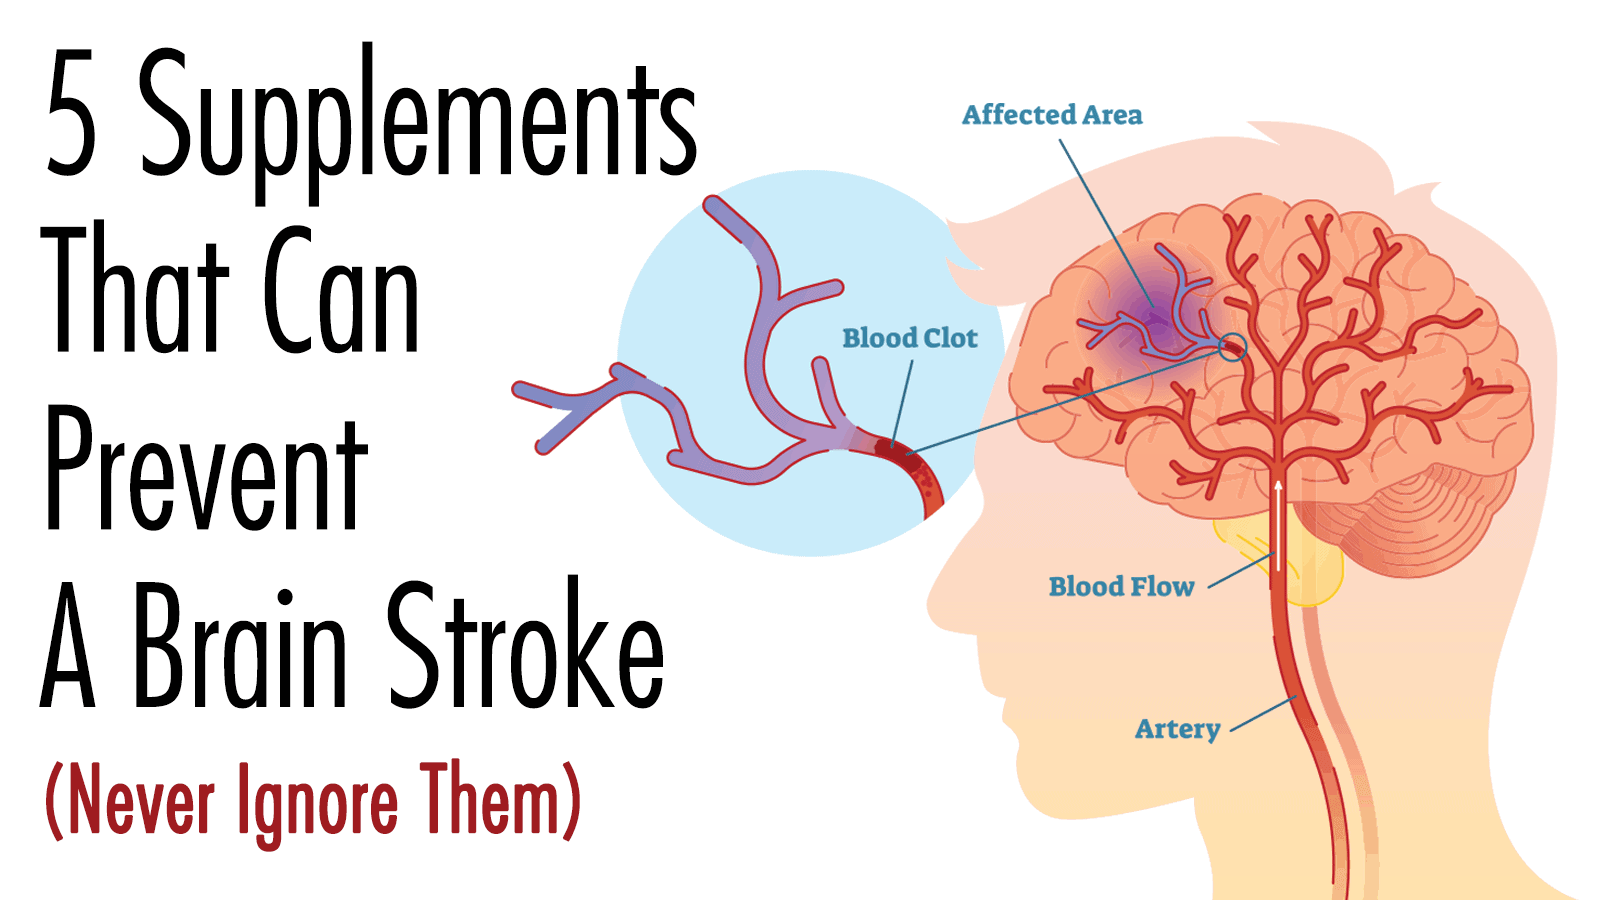 5 Supplements That Can Help Prevent a Brain Stroke